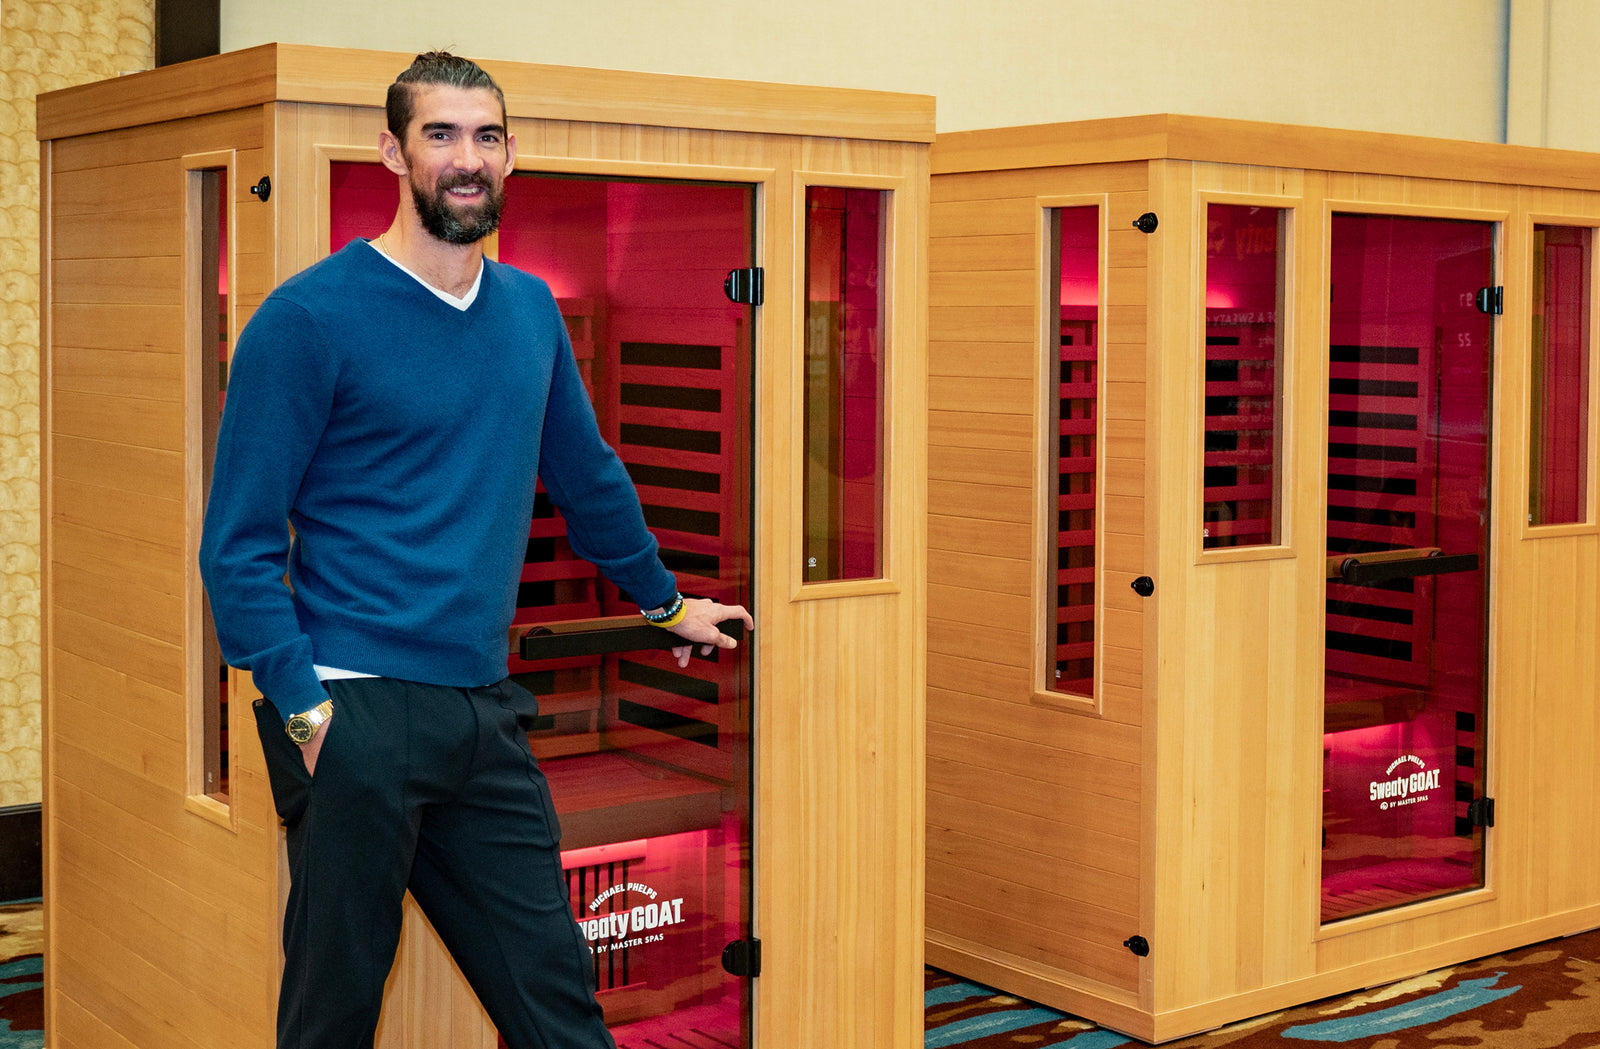 Master Spas expands wellness offerings and Phelps partnership, with new line of saunas